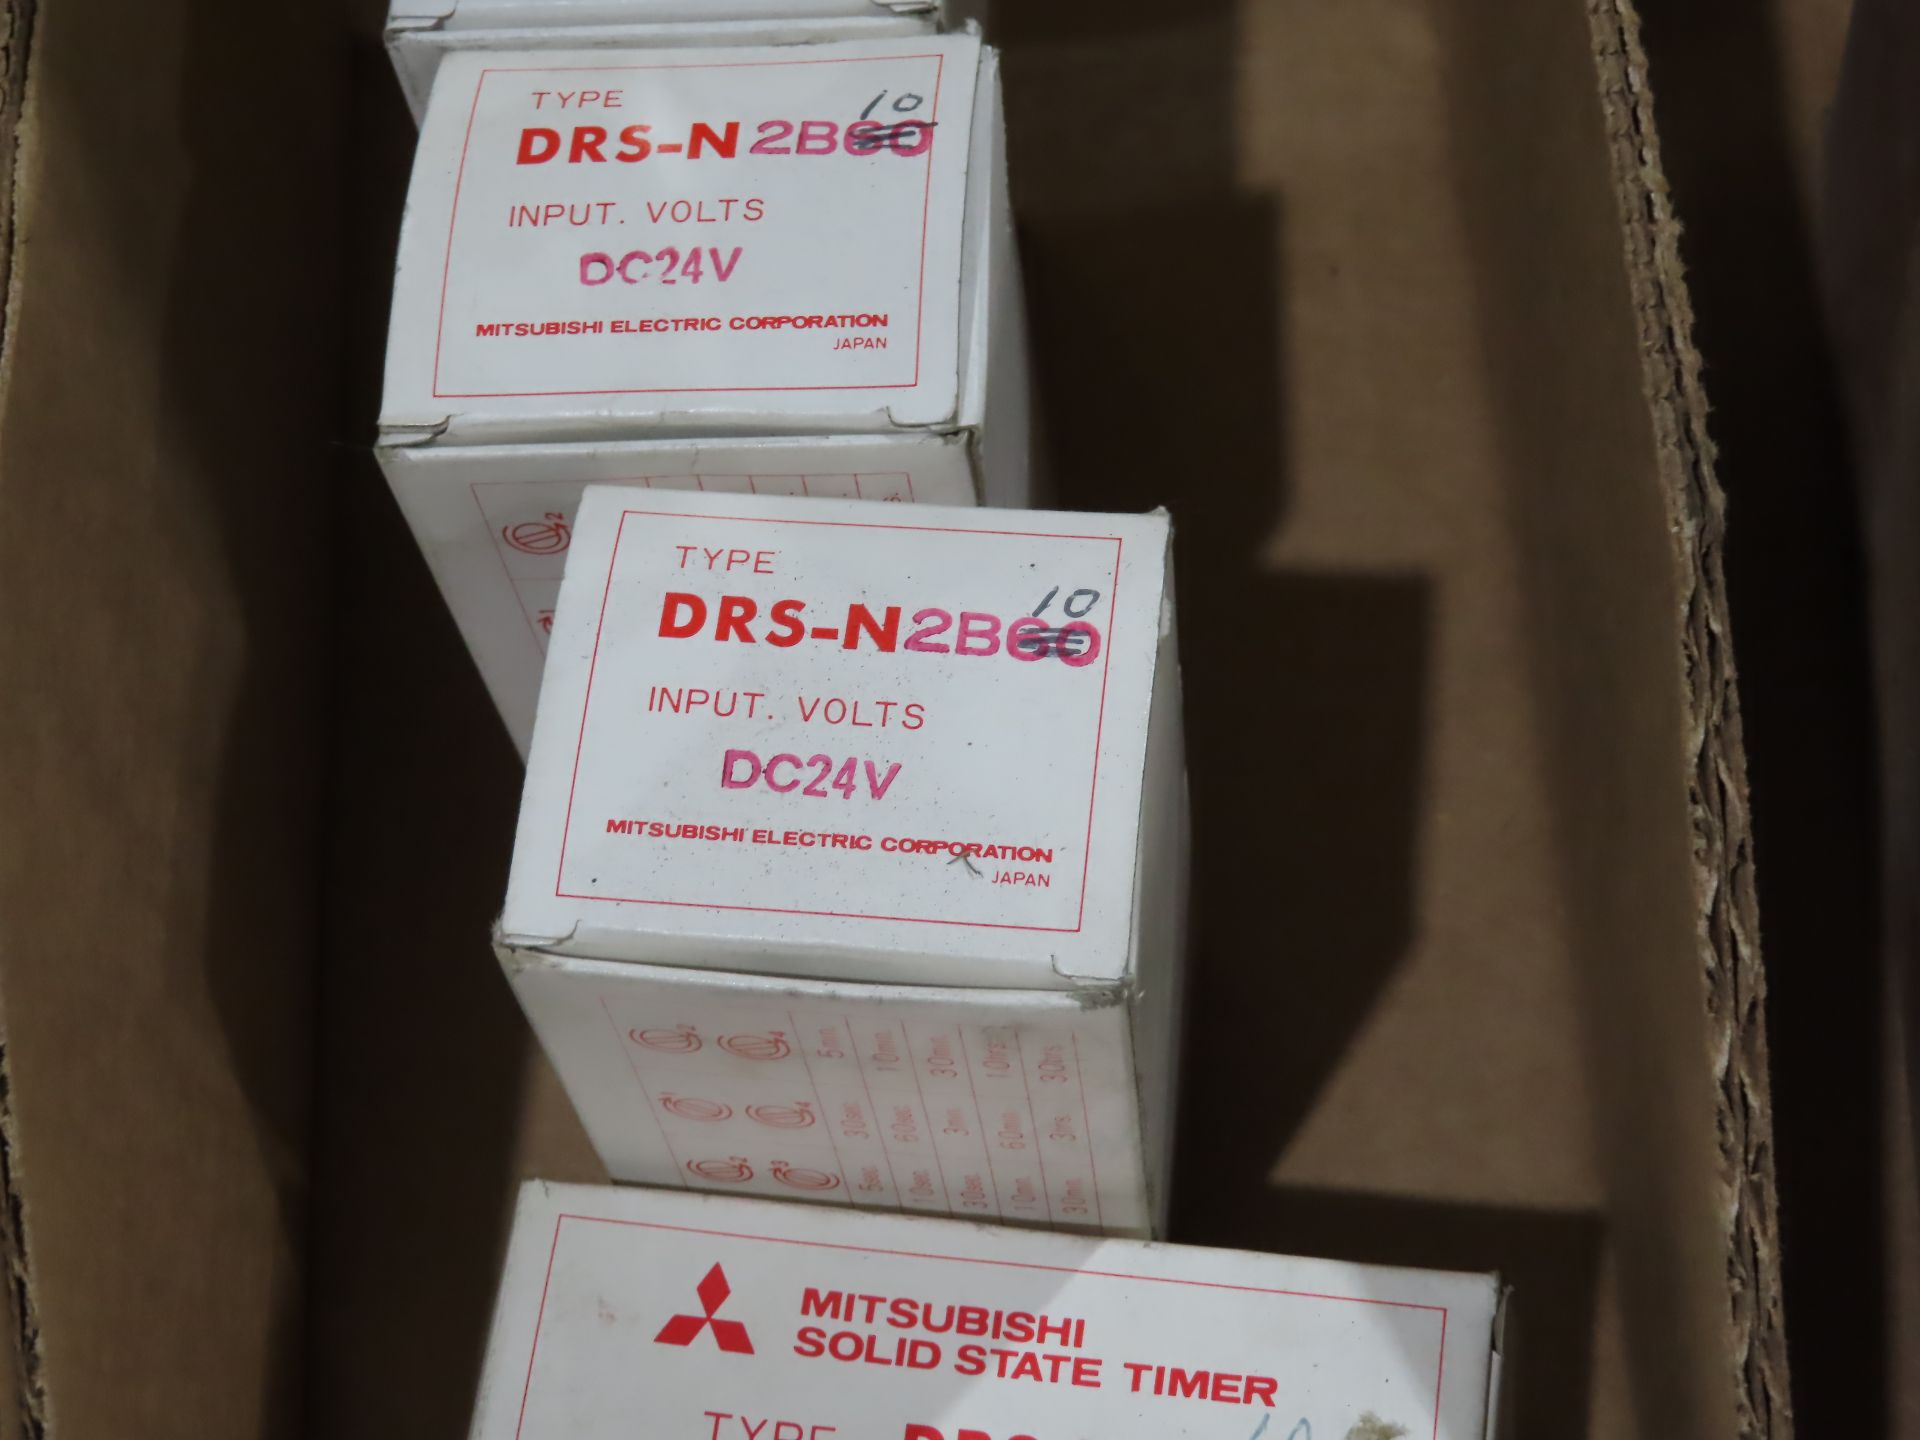 Qty 4 Mitsubishi model DRS-N2B10, new in boxes, as always with Brolyn LLC auctions, all lots can - Image 2 of 2